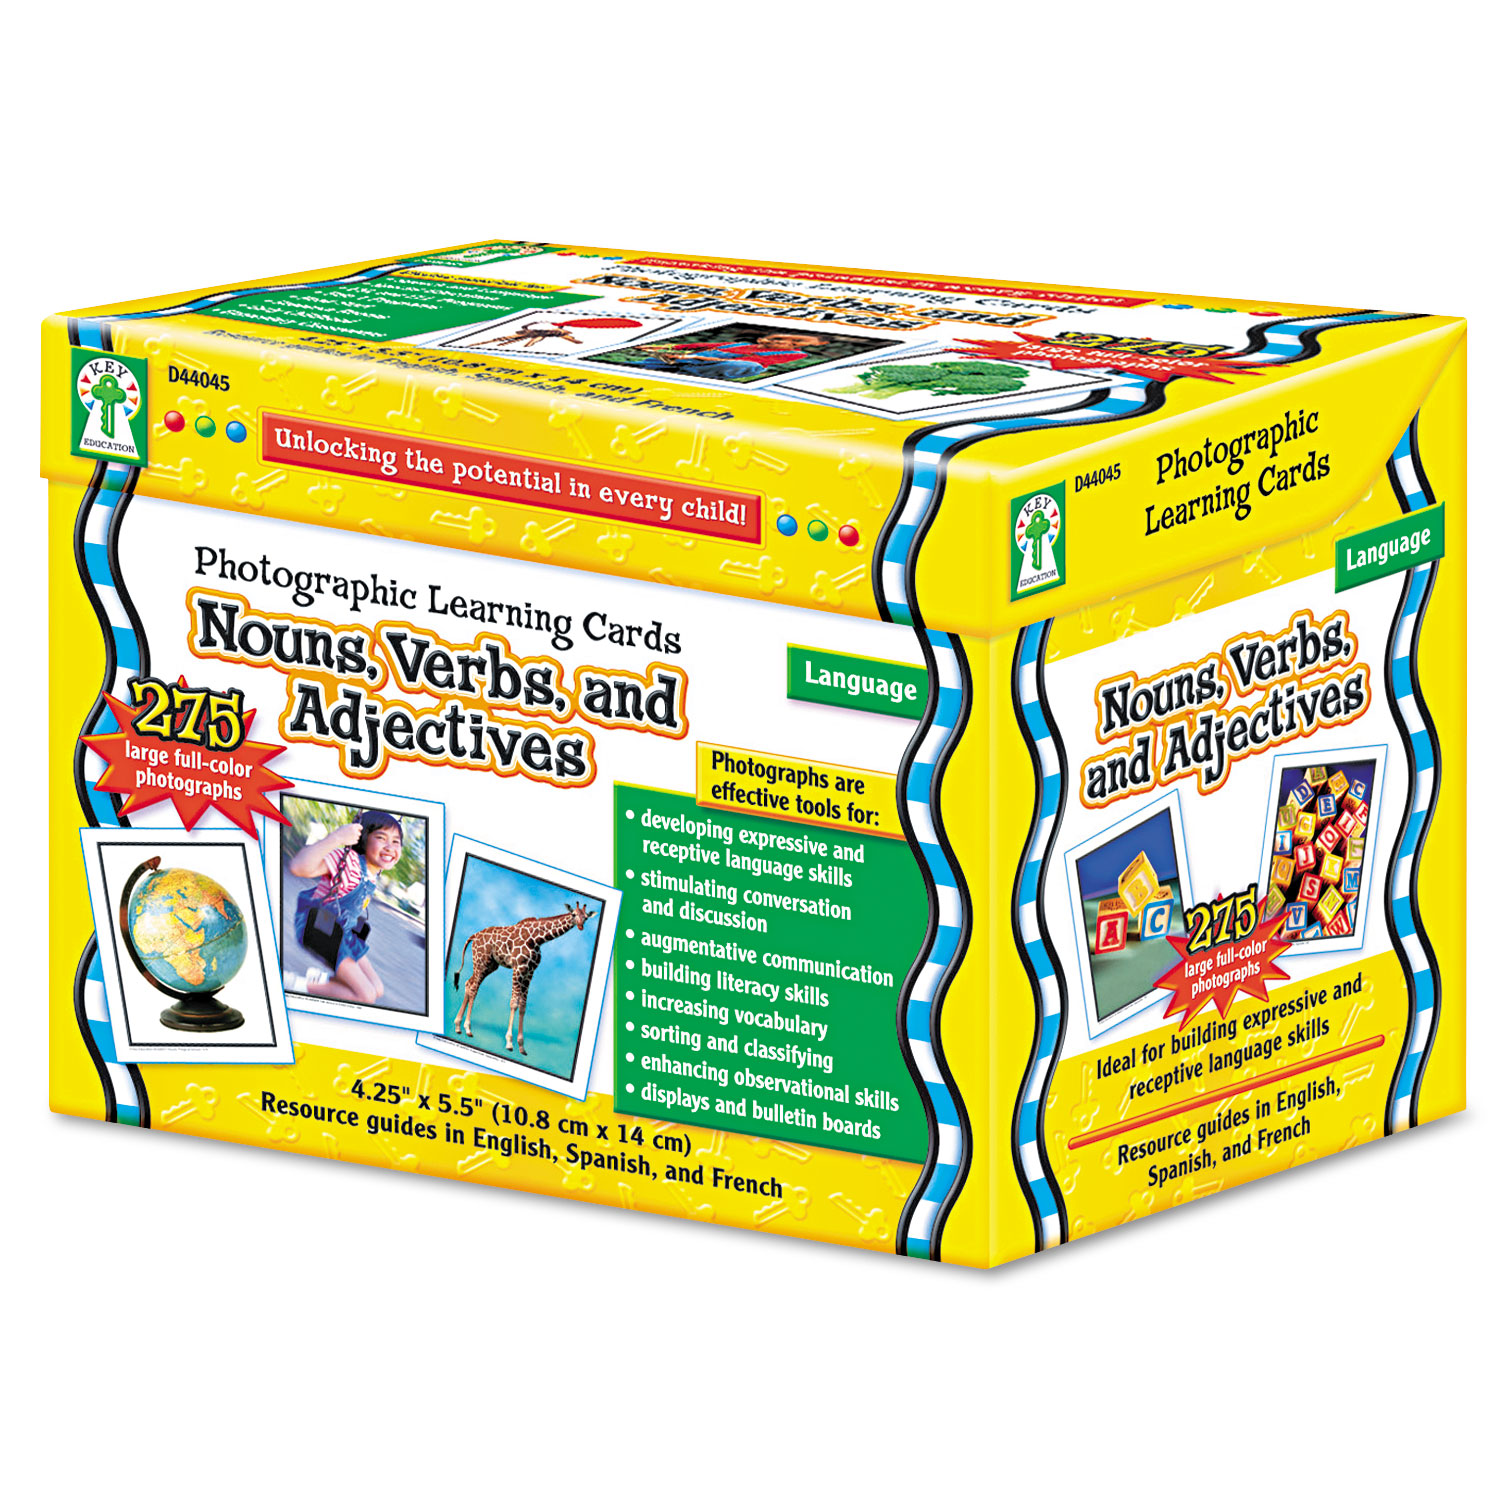 Photographic Learning Cards Boxed Set, Nouns/Verbs/Adjectives, Grades K-5